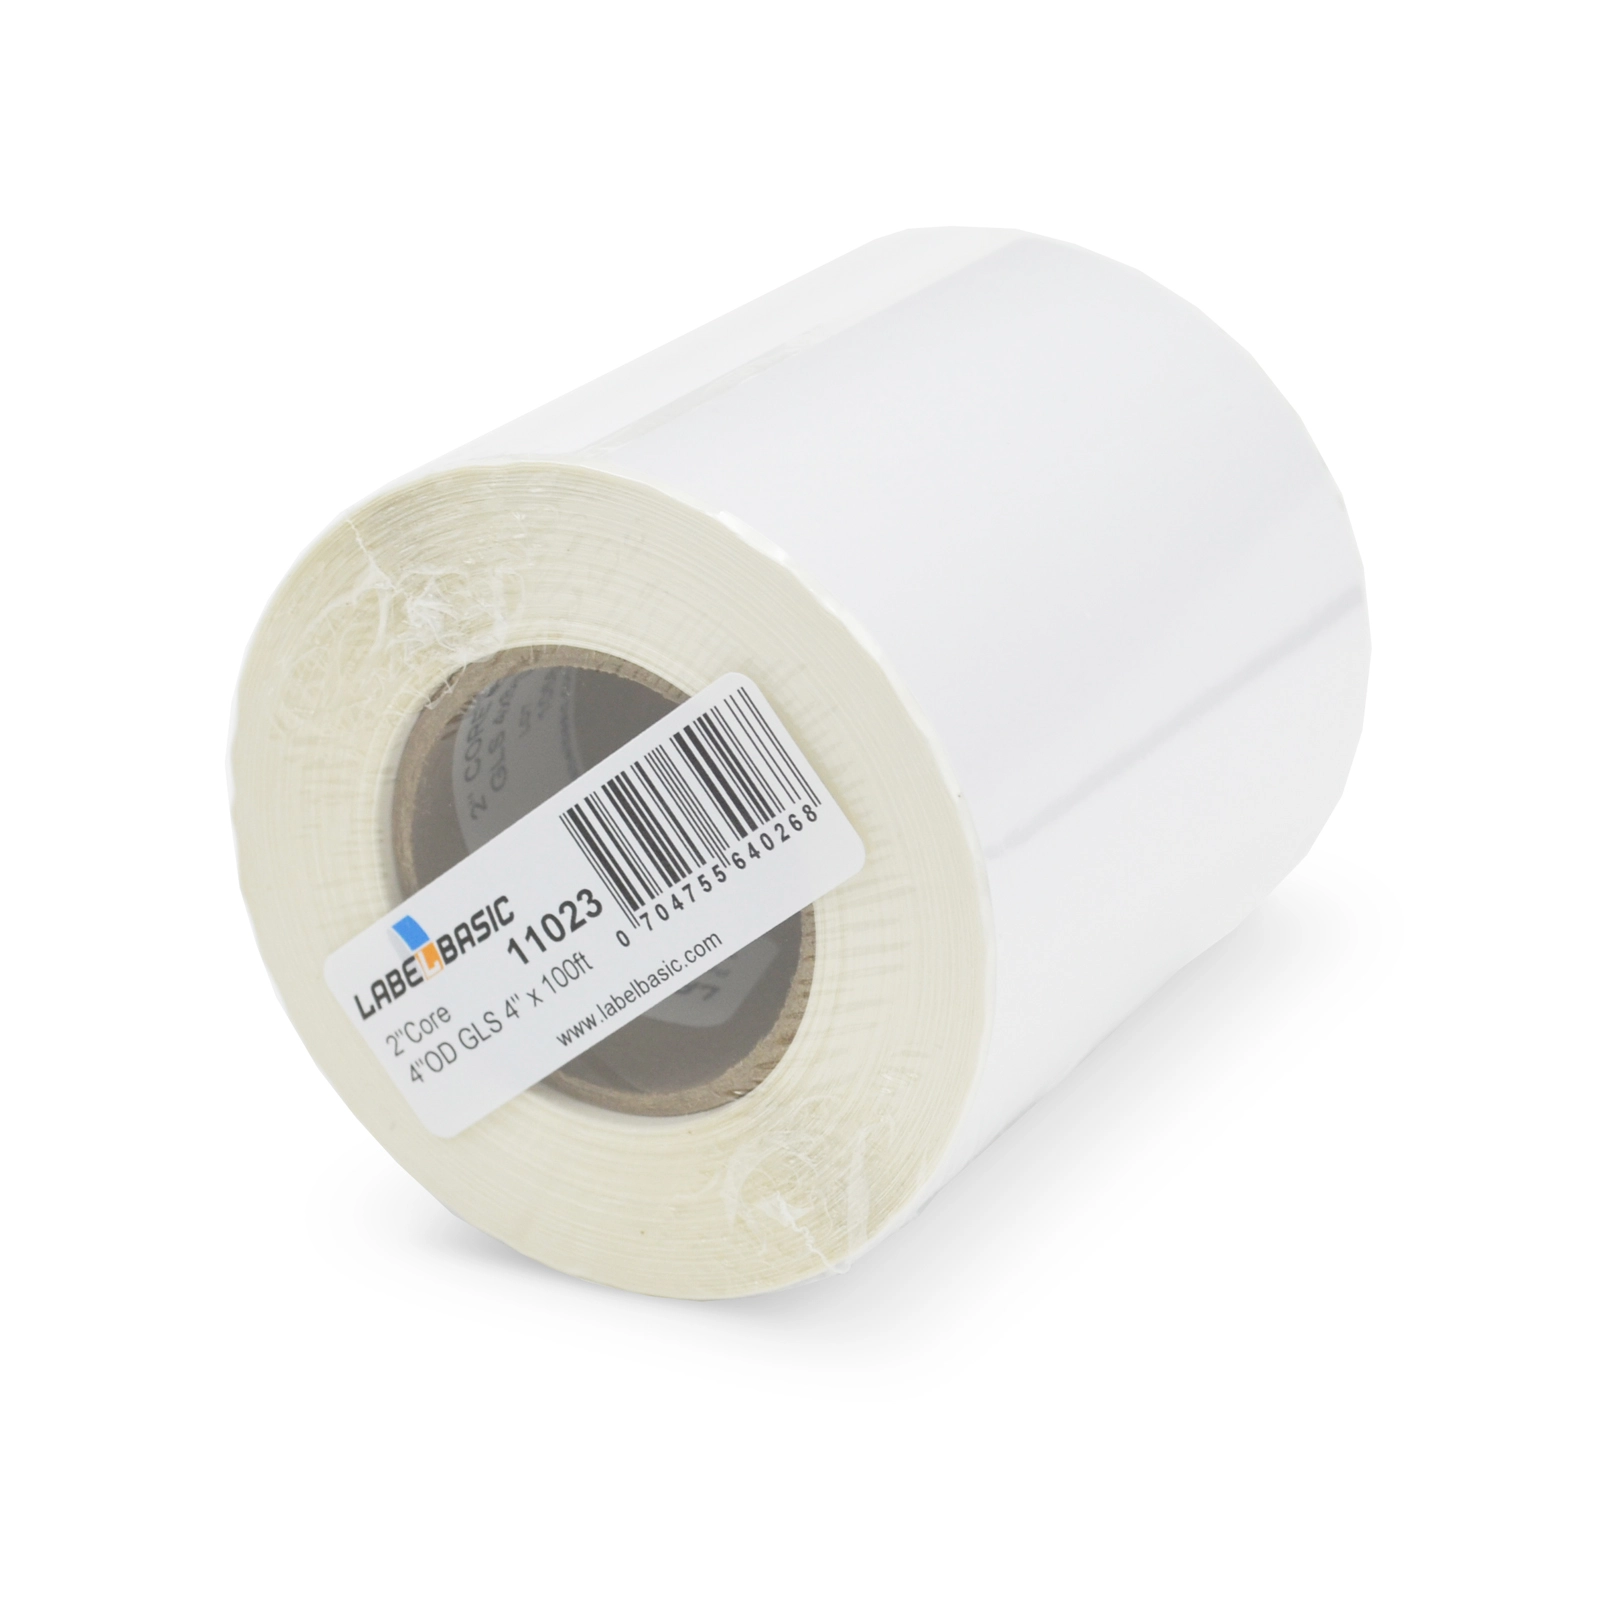 Rite Aid Home Removable Self-Sticking Labels - 1 in x 2.75 in, 128 ct